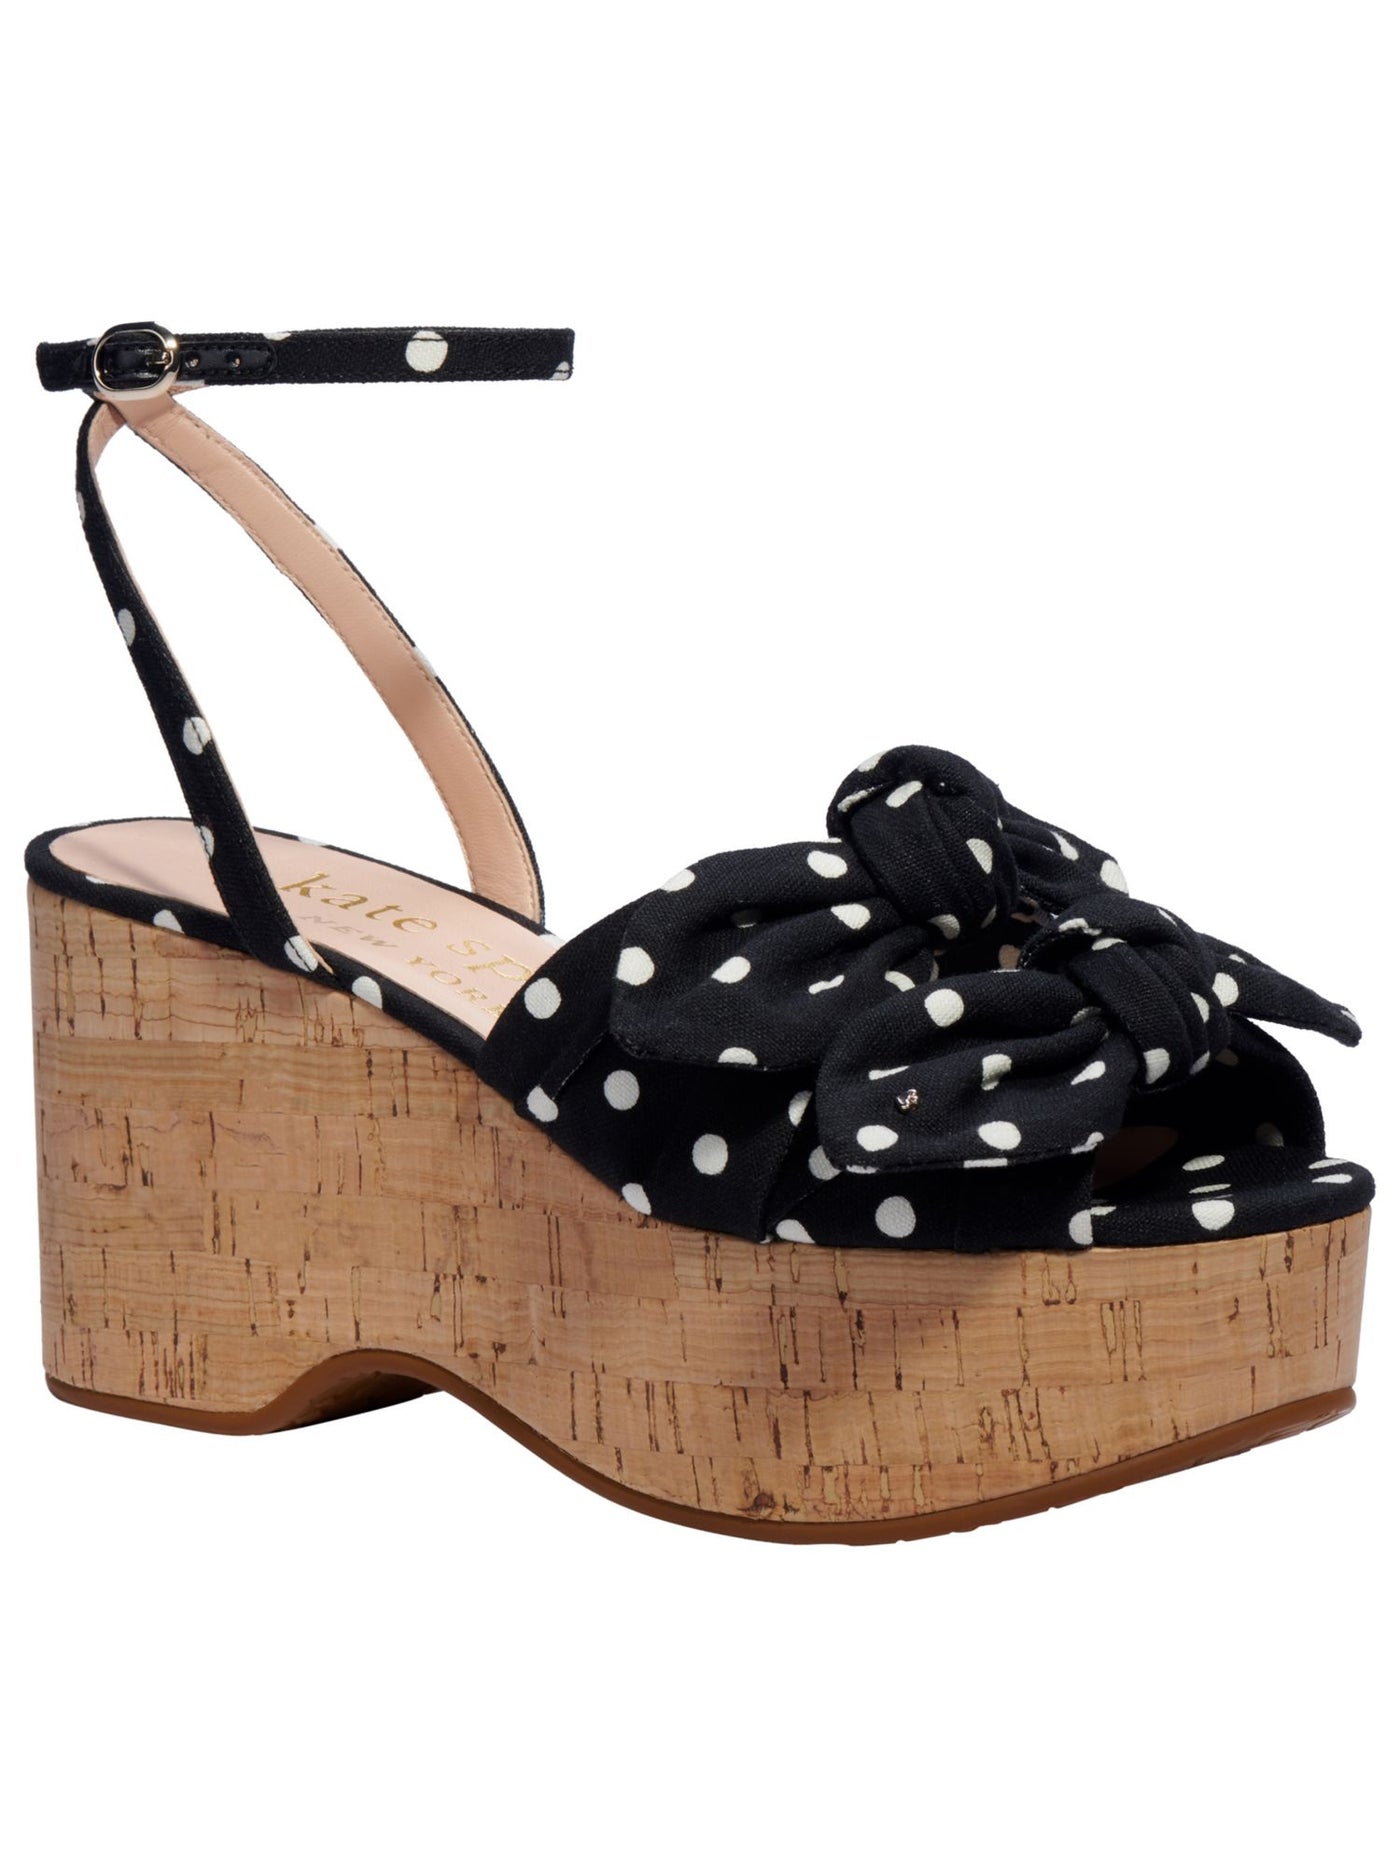 KATE SPADE NEW YORK Womens Black/French Cream Polka Dot Double Bow Cork Ankle Strap Cushioned Julep Round Toe Wedge Buckle Dress Sandals Shoes 7.5 B